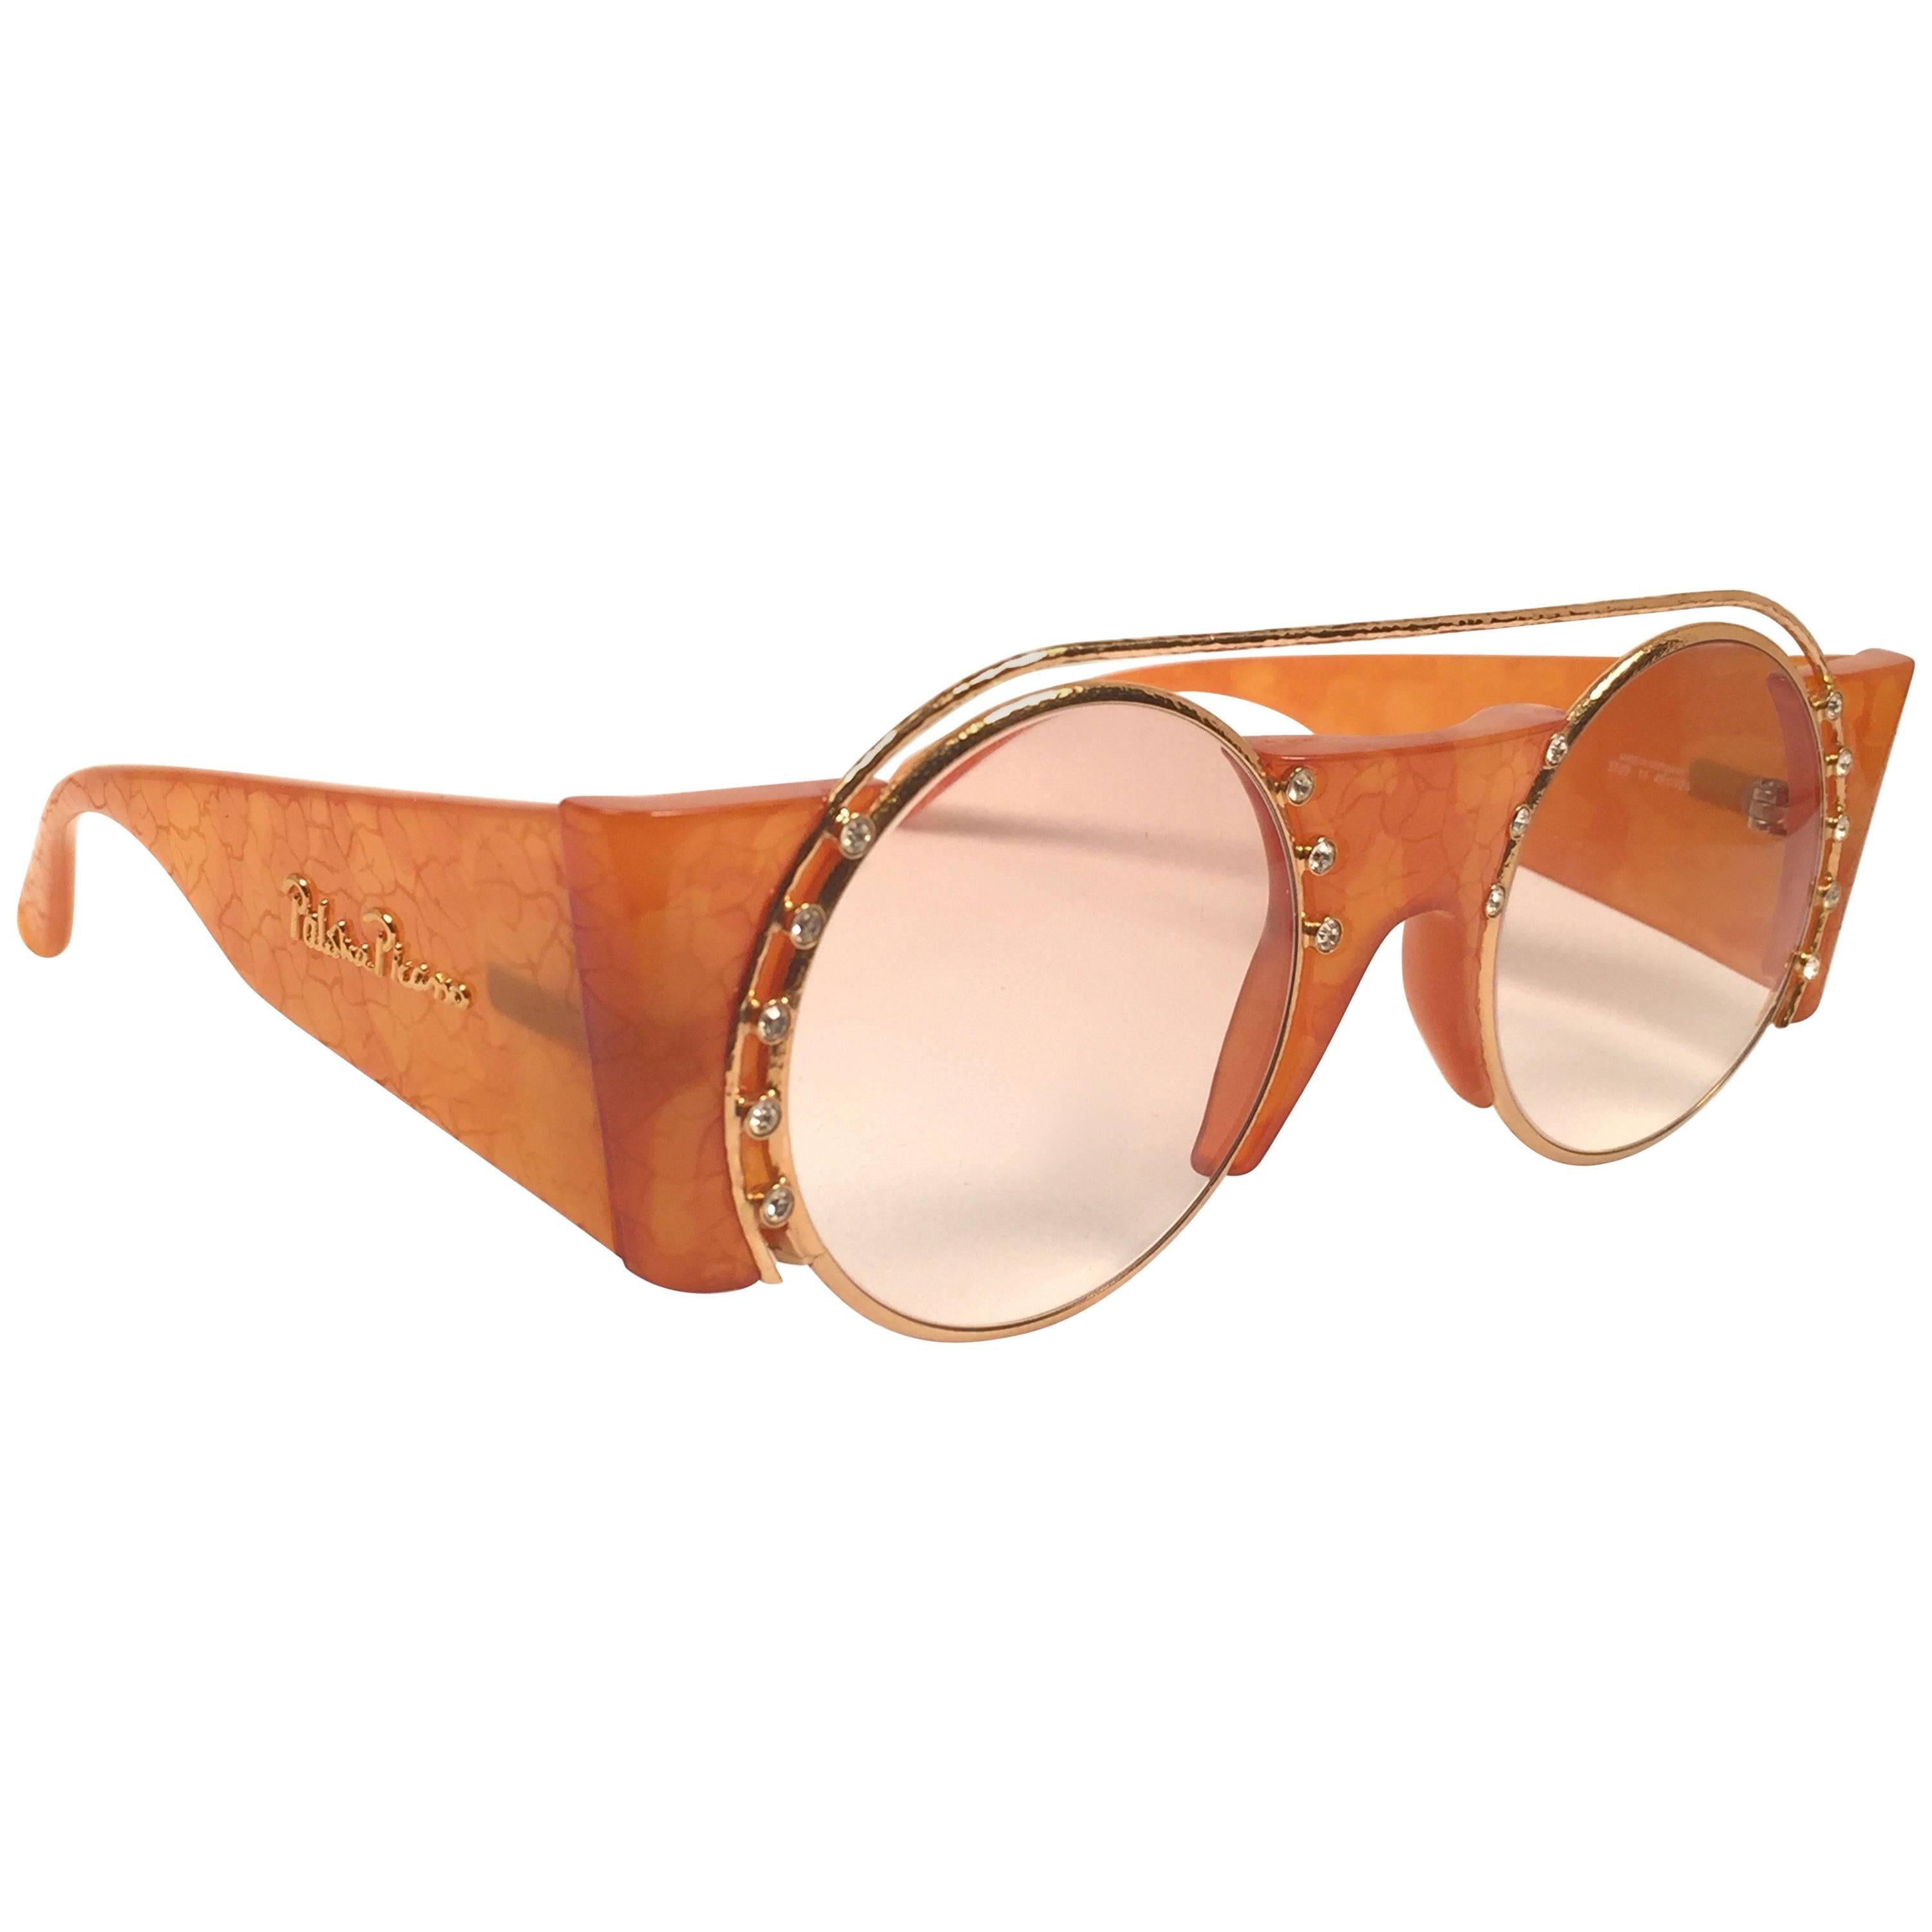 Paloma Picasso Vintage Oval Gold 3729 Lady Gaga Lunettes de soleil Made in Germany 1980 en vente